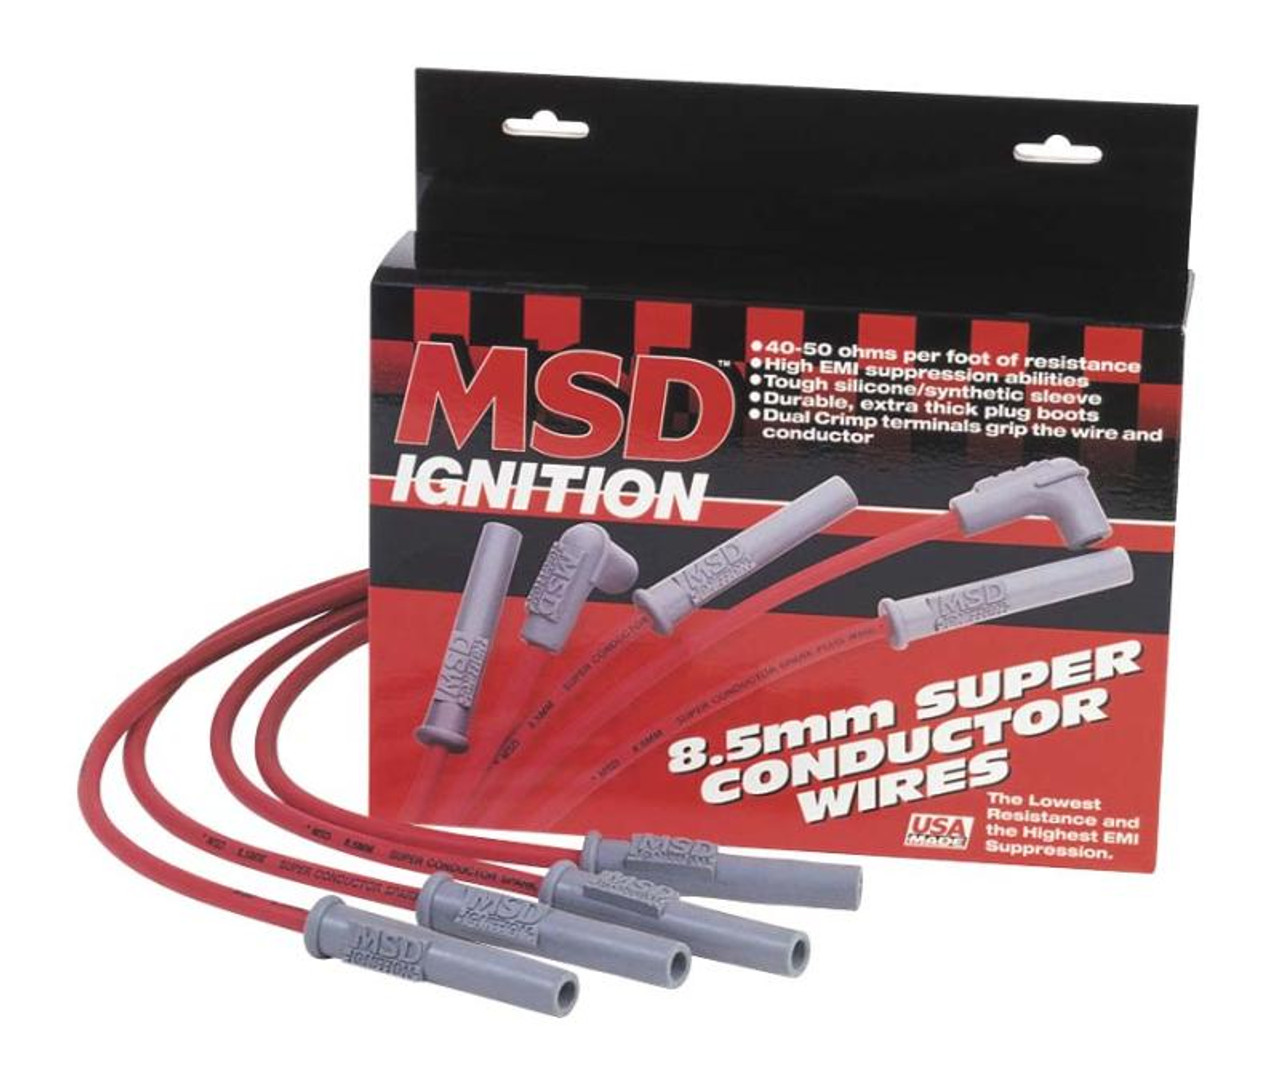 MSD Universal Spark Plug Wire Set - 8 cyl. - Incl Socket And HEI